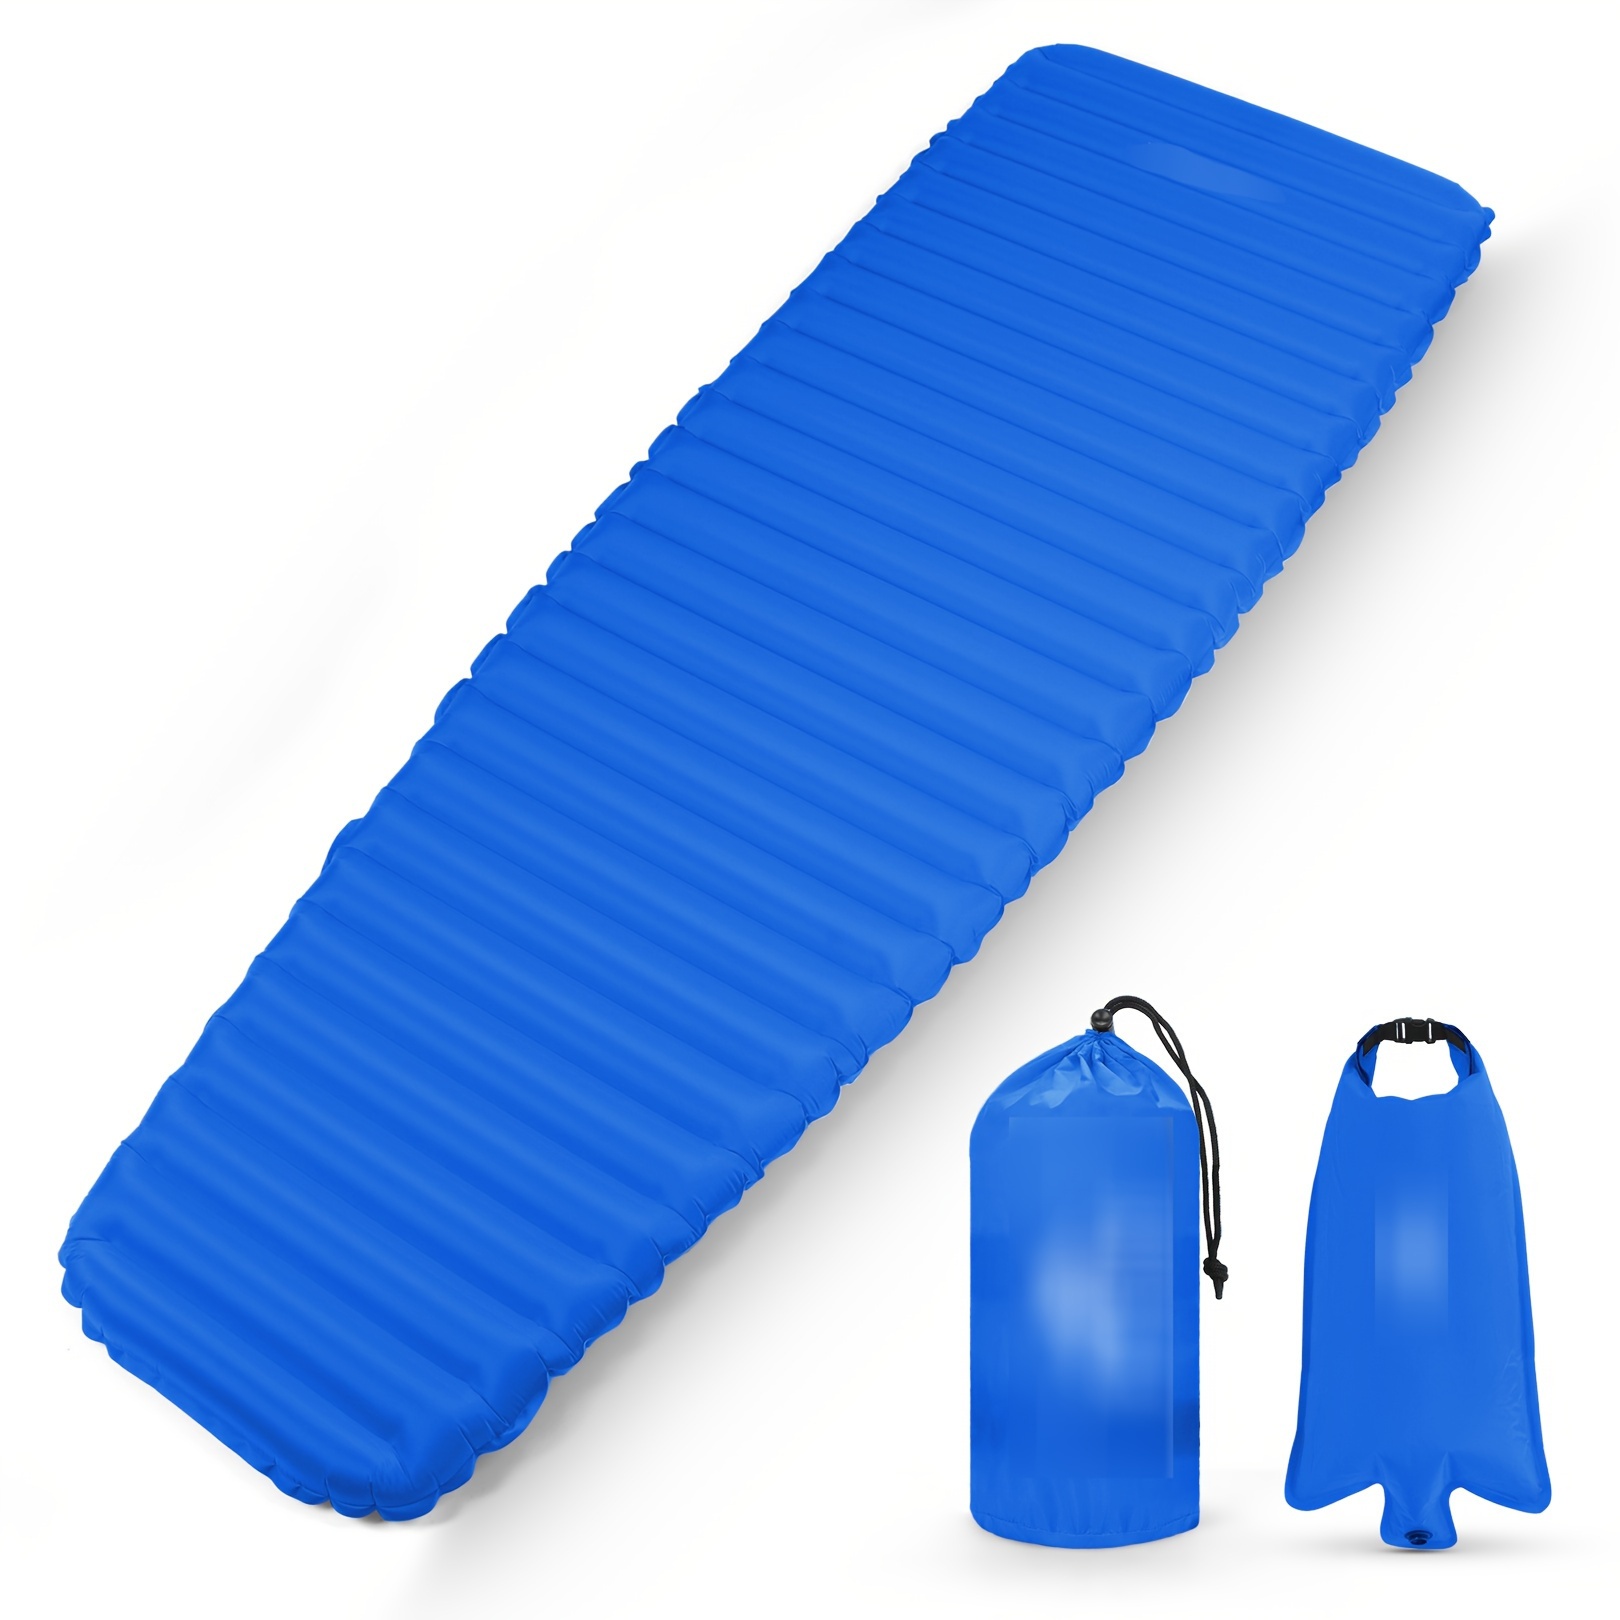 

Sleeping Pad For Camping - Ultralight Inflatable Sleeping Mat For Camping Backpacking Hiking Tent Traveling - Portable Compact Lightweight Waterproof Air Mattress With Inflating Bag